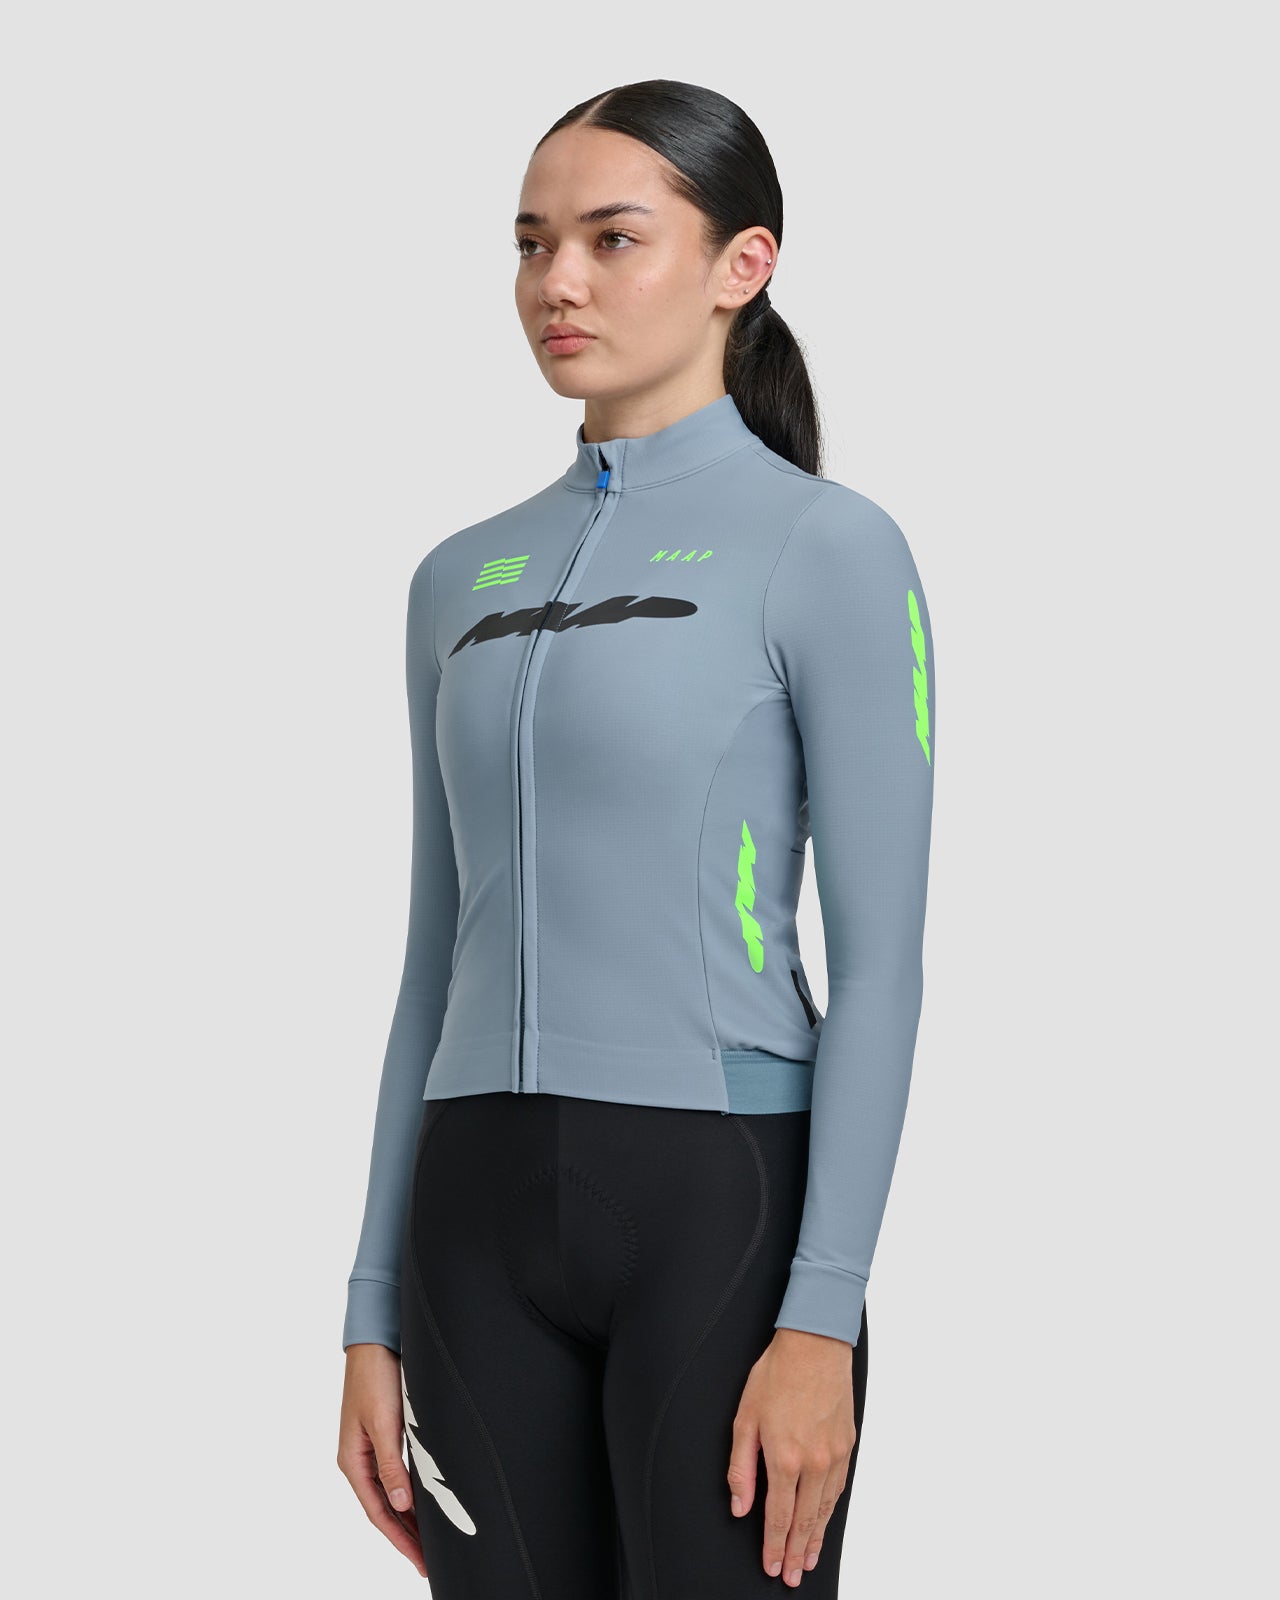 Eclipse Thermal LS Jersey 2.0 - MAAP Cycling Apparel